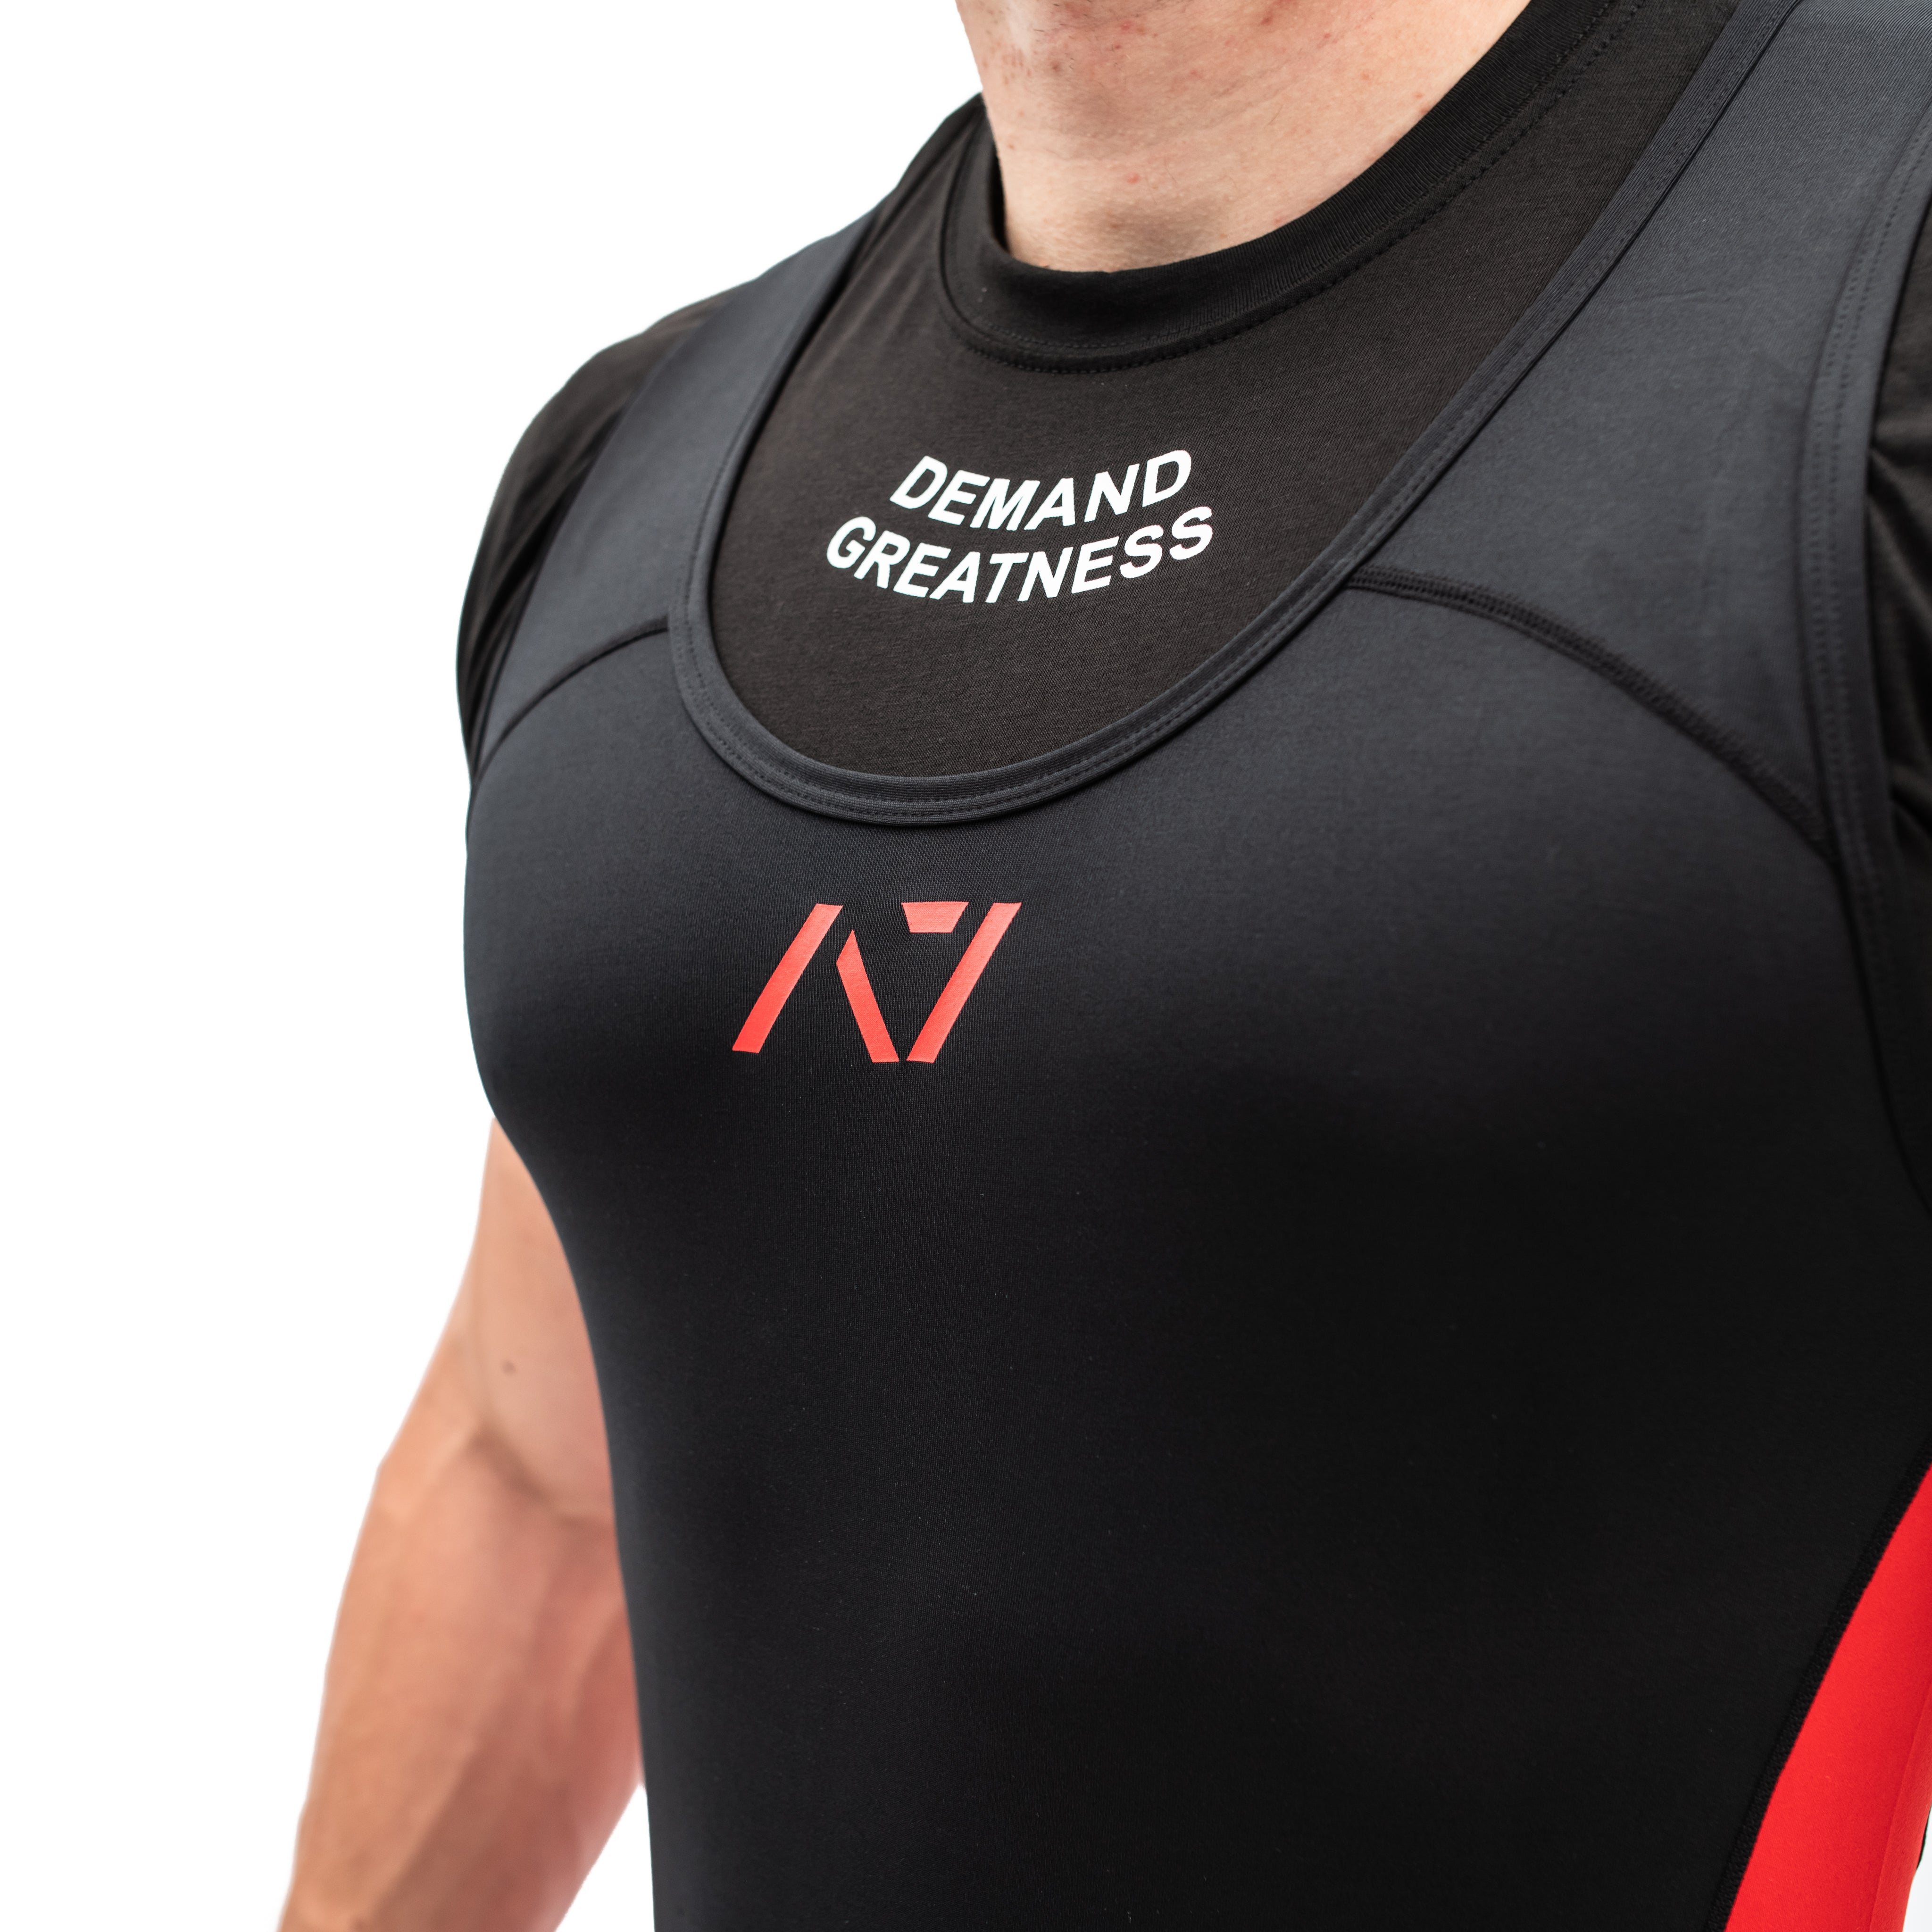 A7 Singlet - Slate - IPF Approved